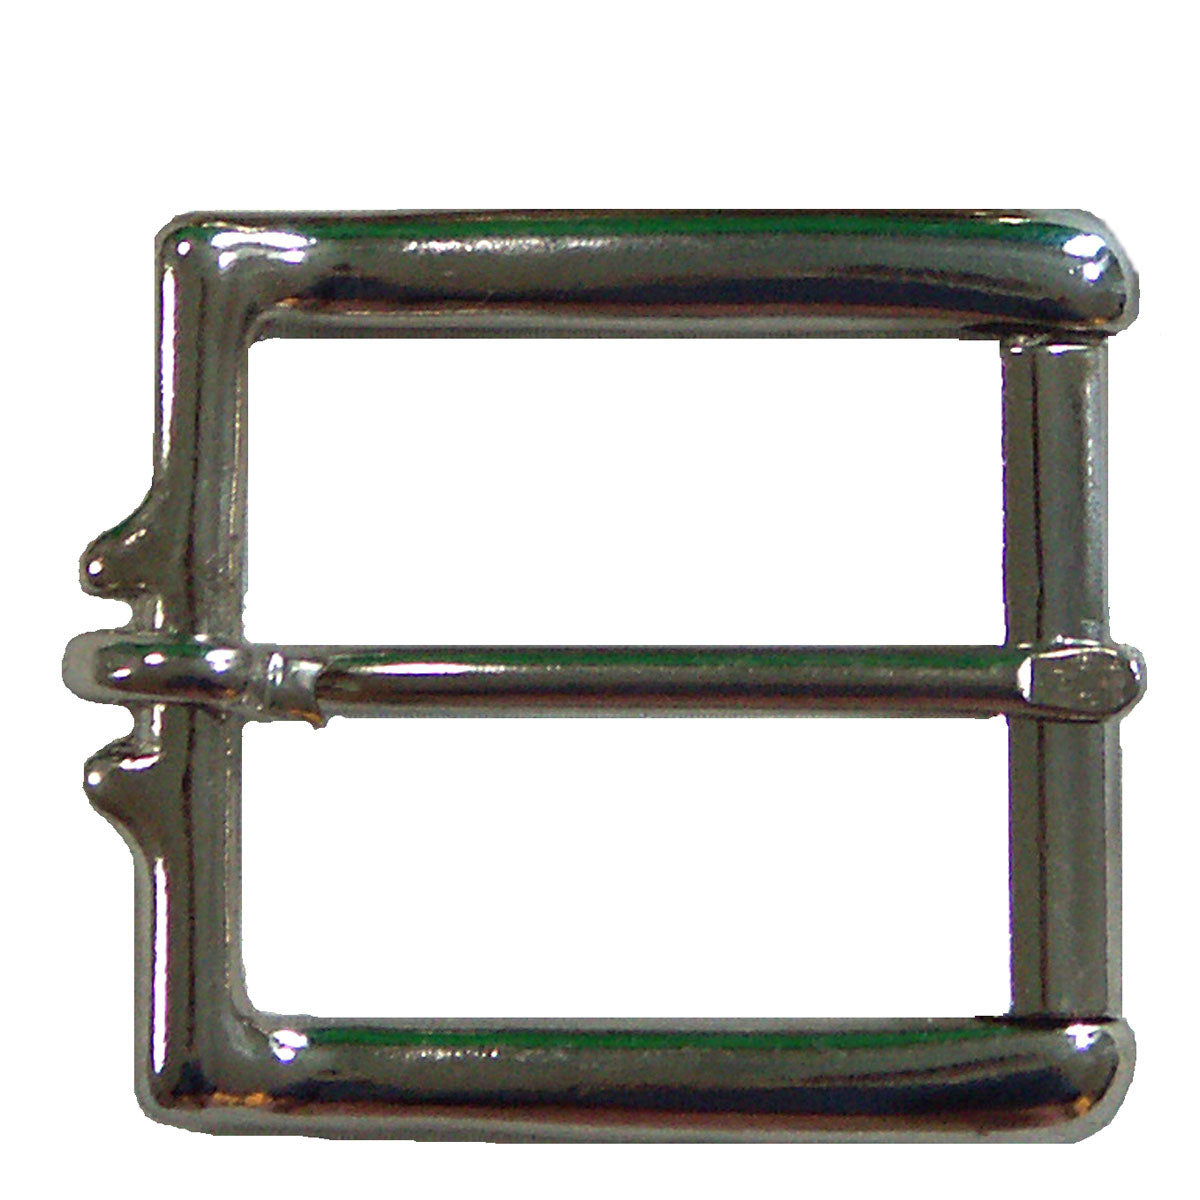 #49 Stainless Steel Buckle 1" with 4.0mm Stainless Steel Tongue (special order)